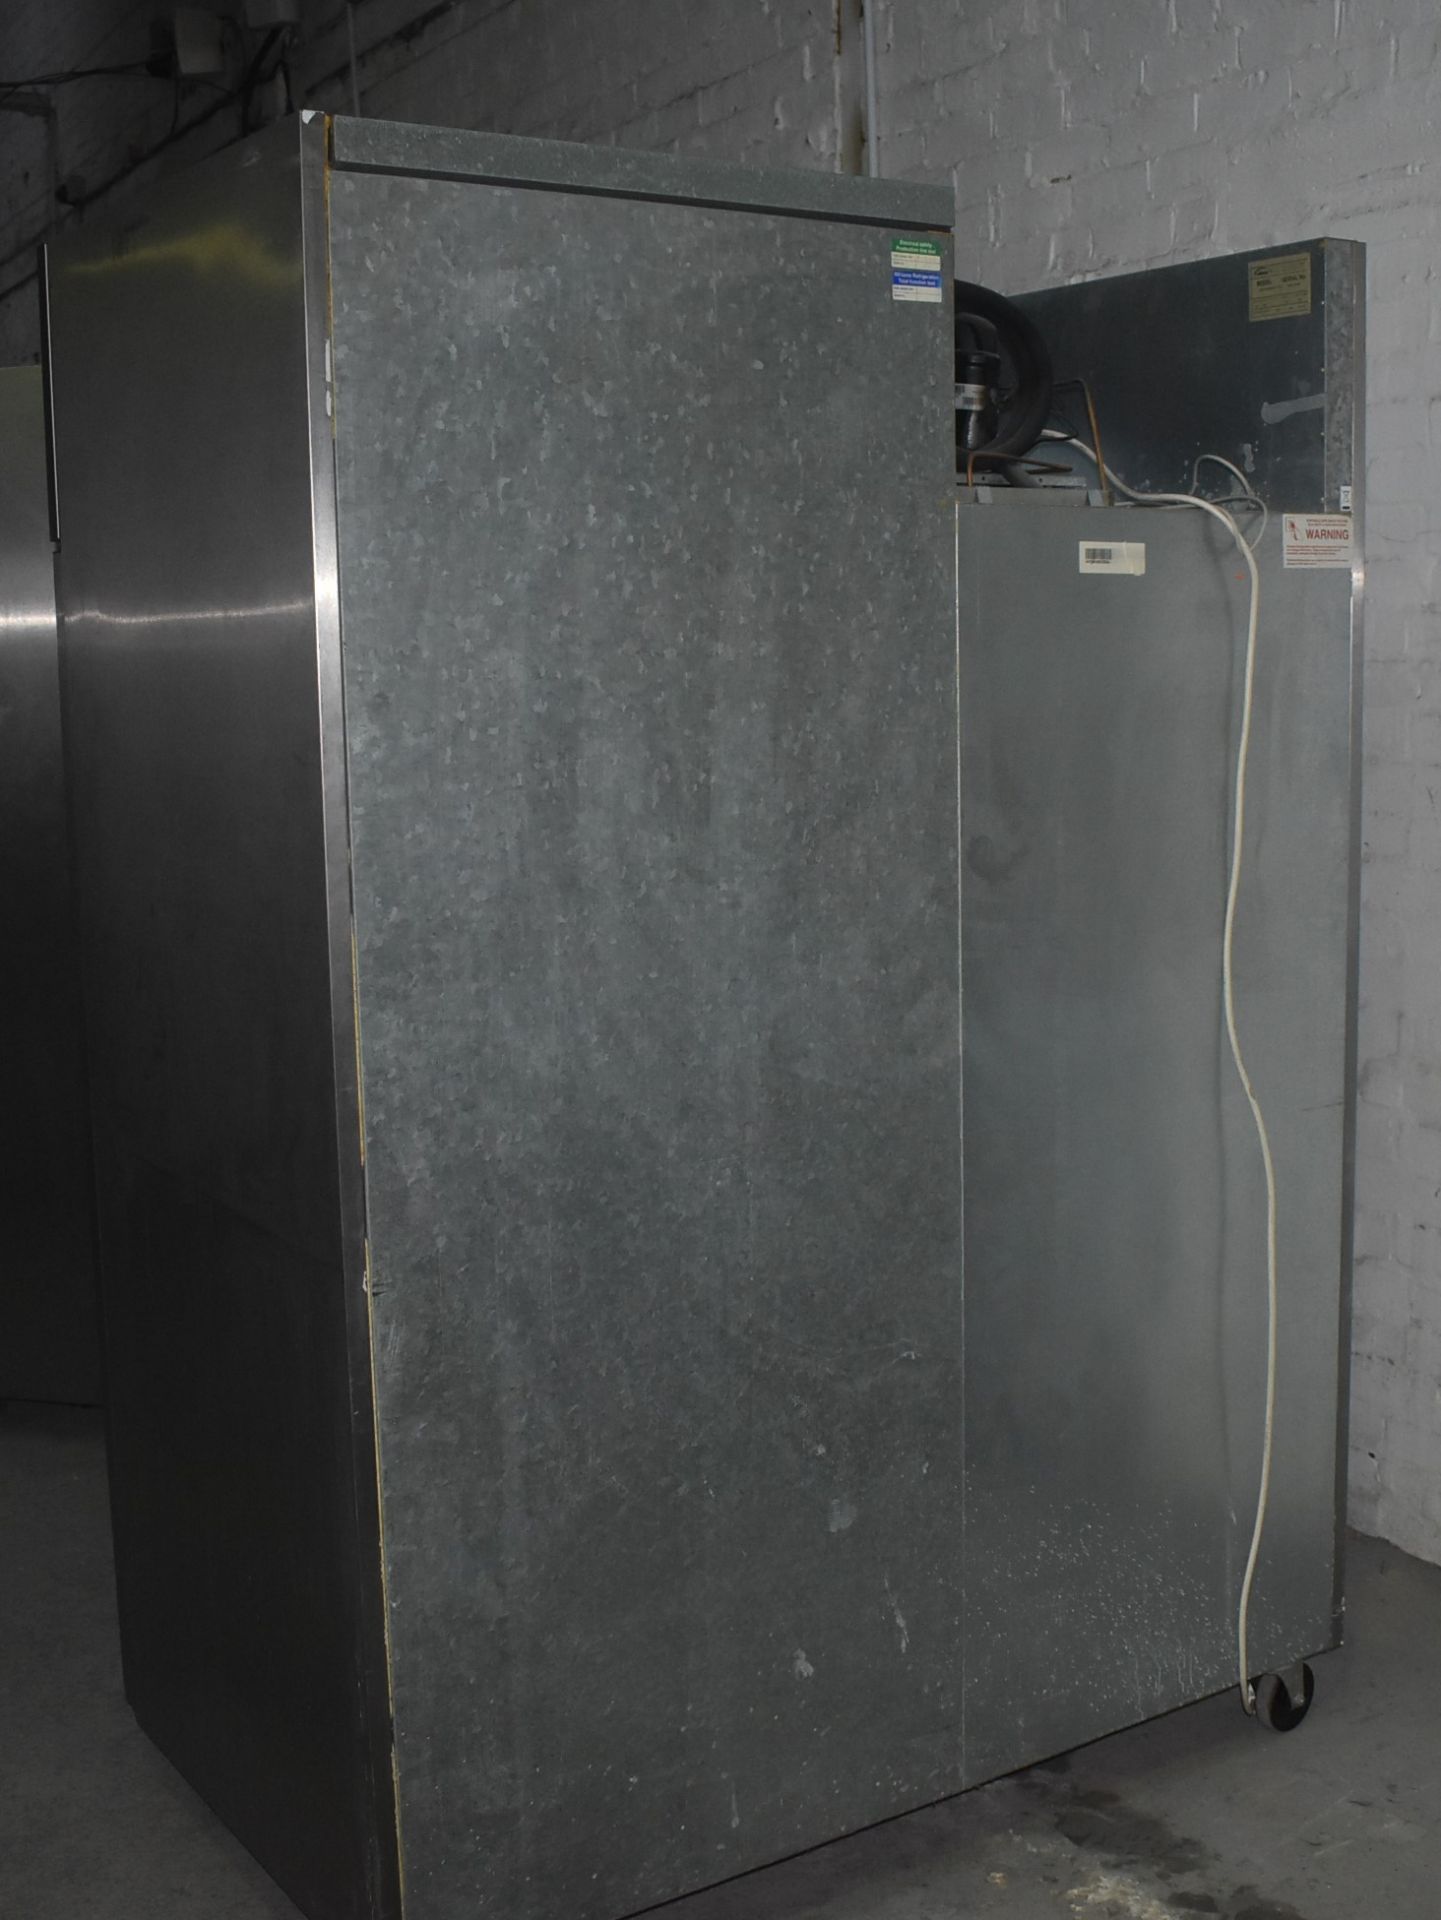 1 x Williams Double Door Upright Refrigerator - Model MJ2SA - Recently Removed From Major - Image 5 of 7